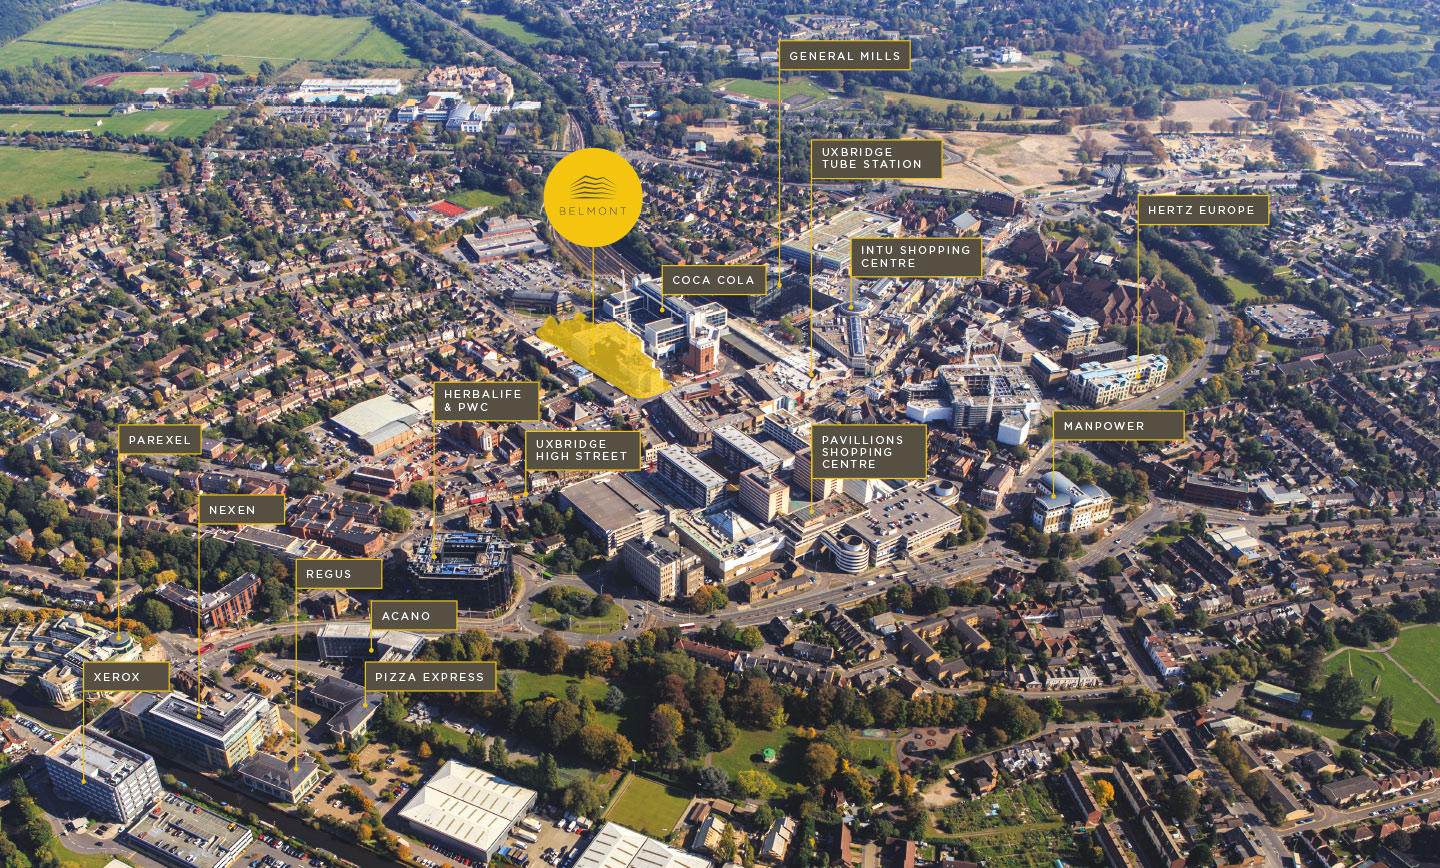 Aerial photograph of the area around Belmont, with annotations